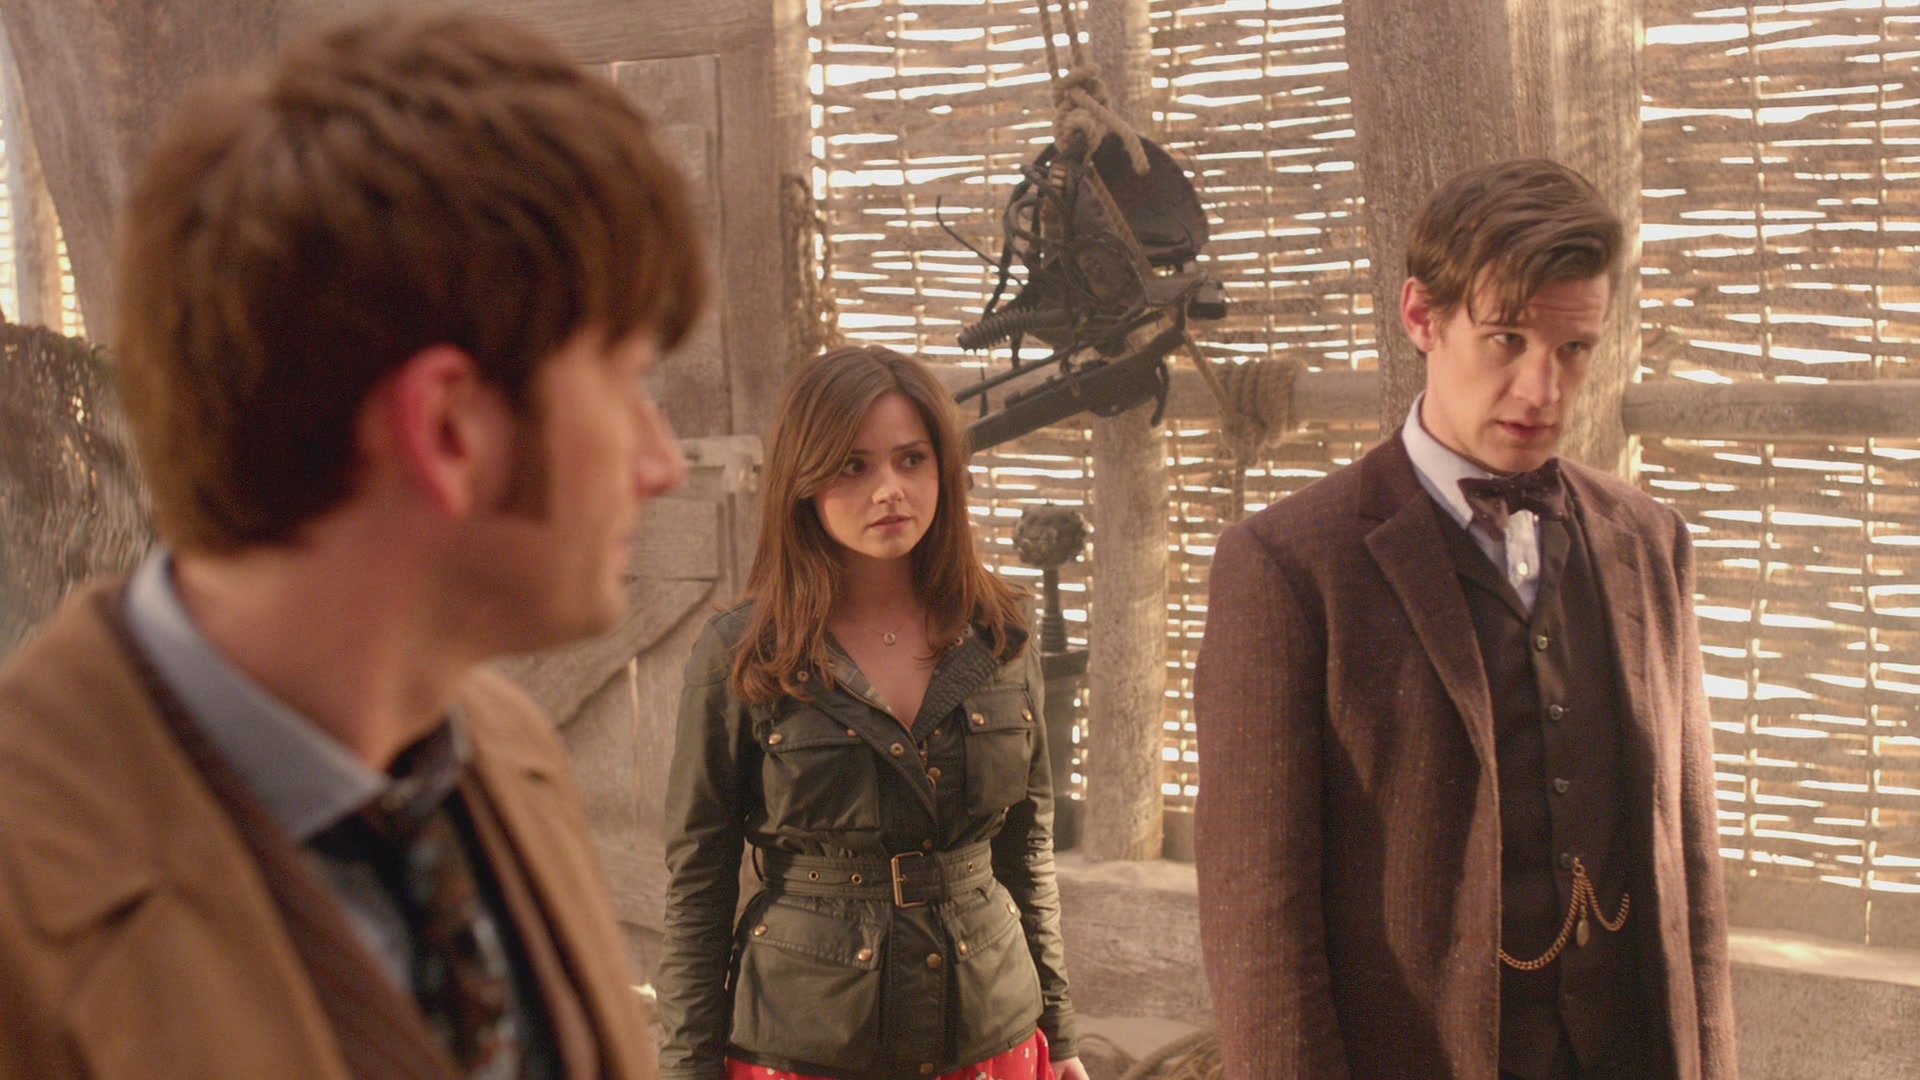 DayOfTheDoctor-Caps-1082.jpg